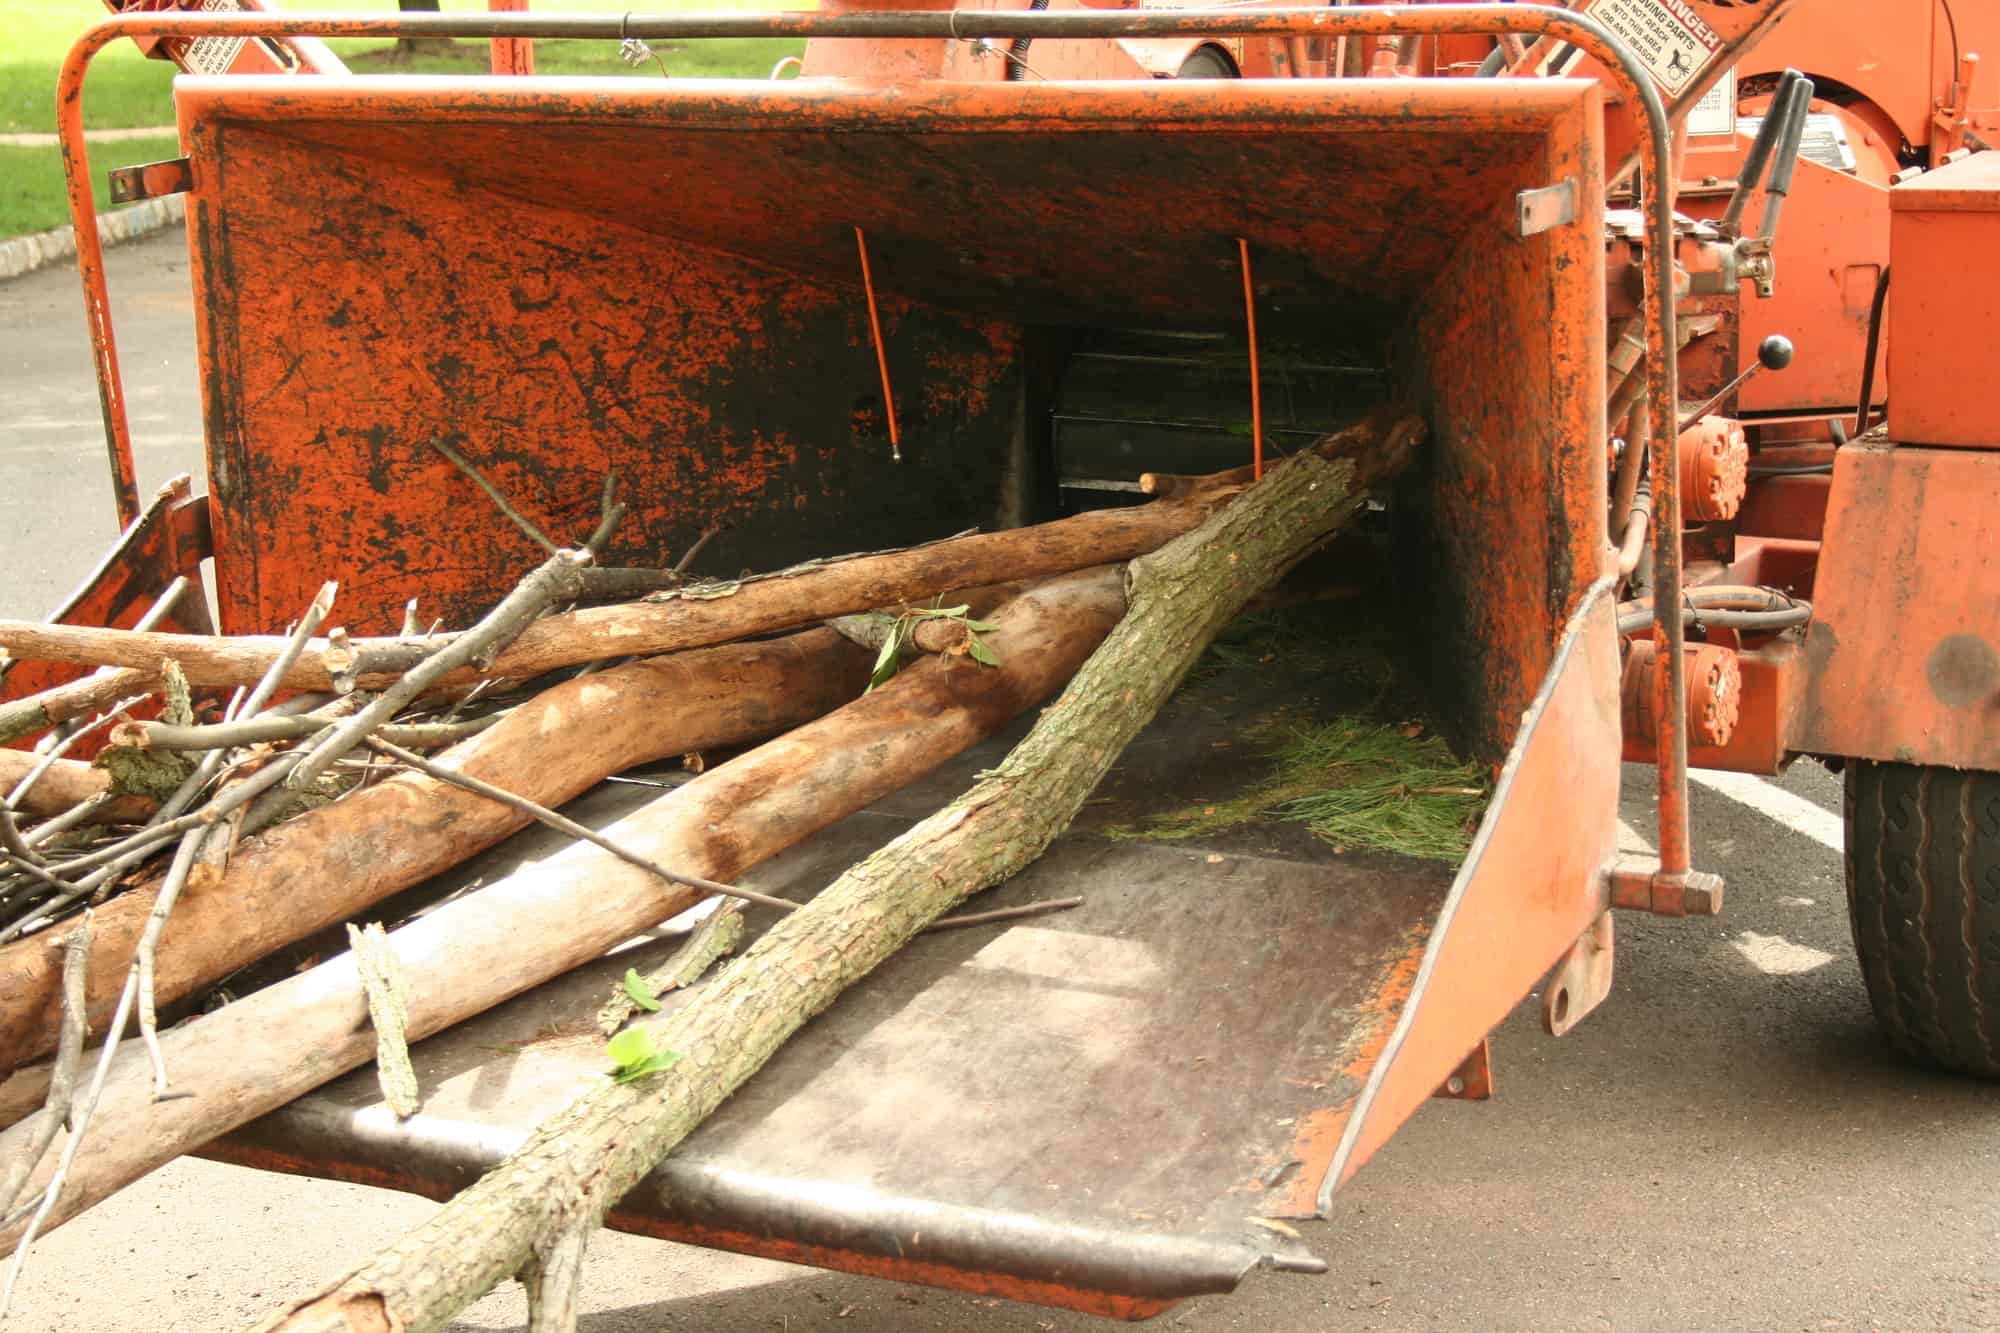 Do You Need a Title to Own a Wood Chipper?